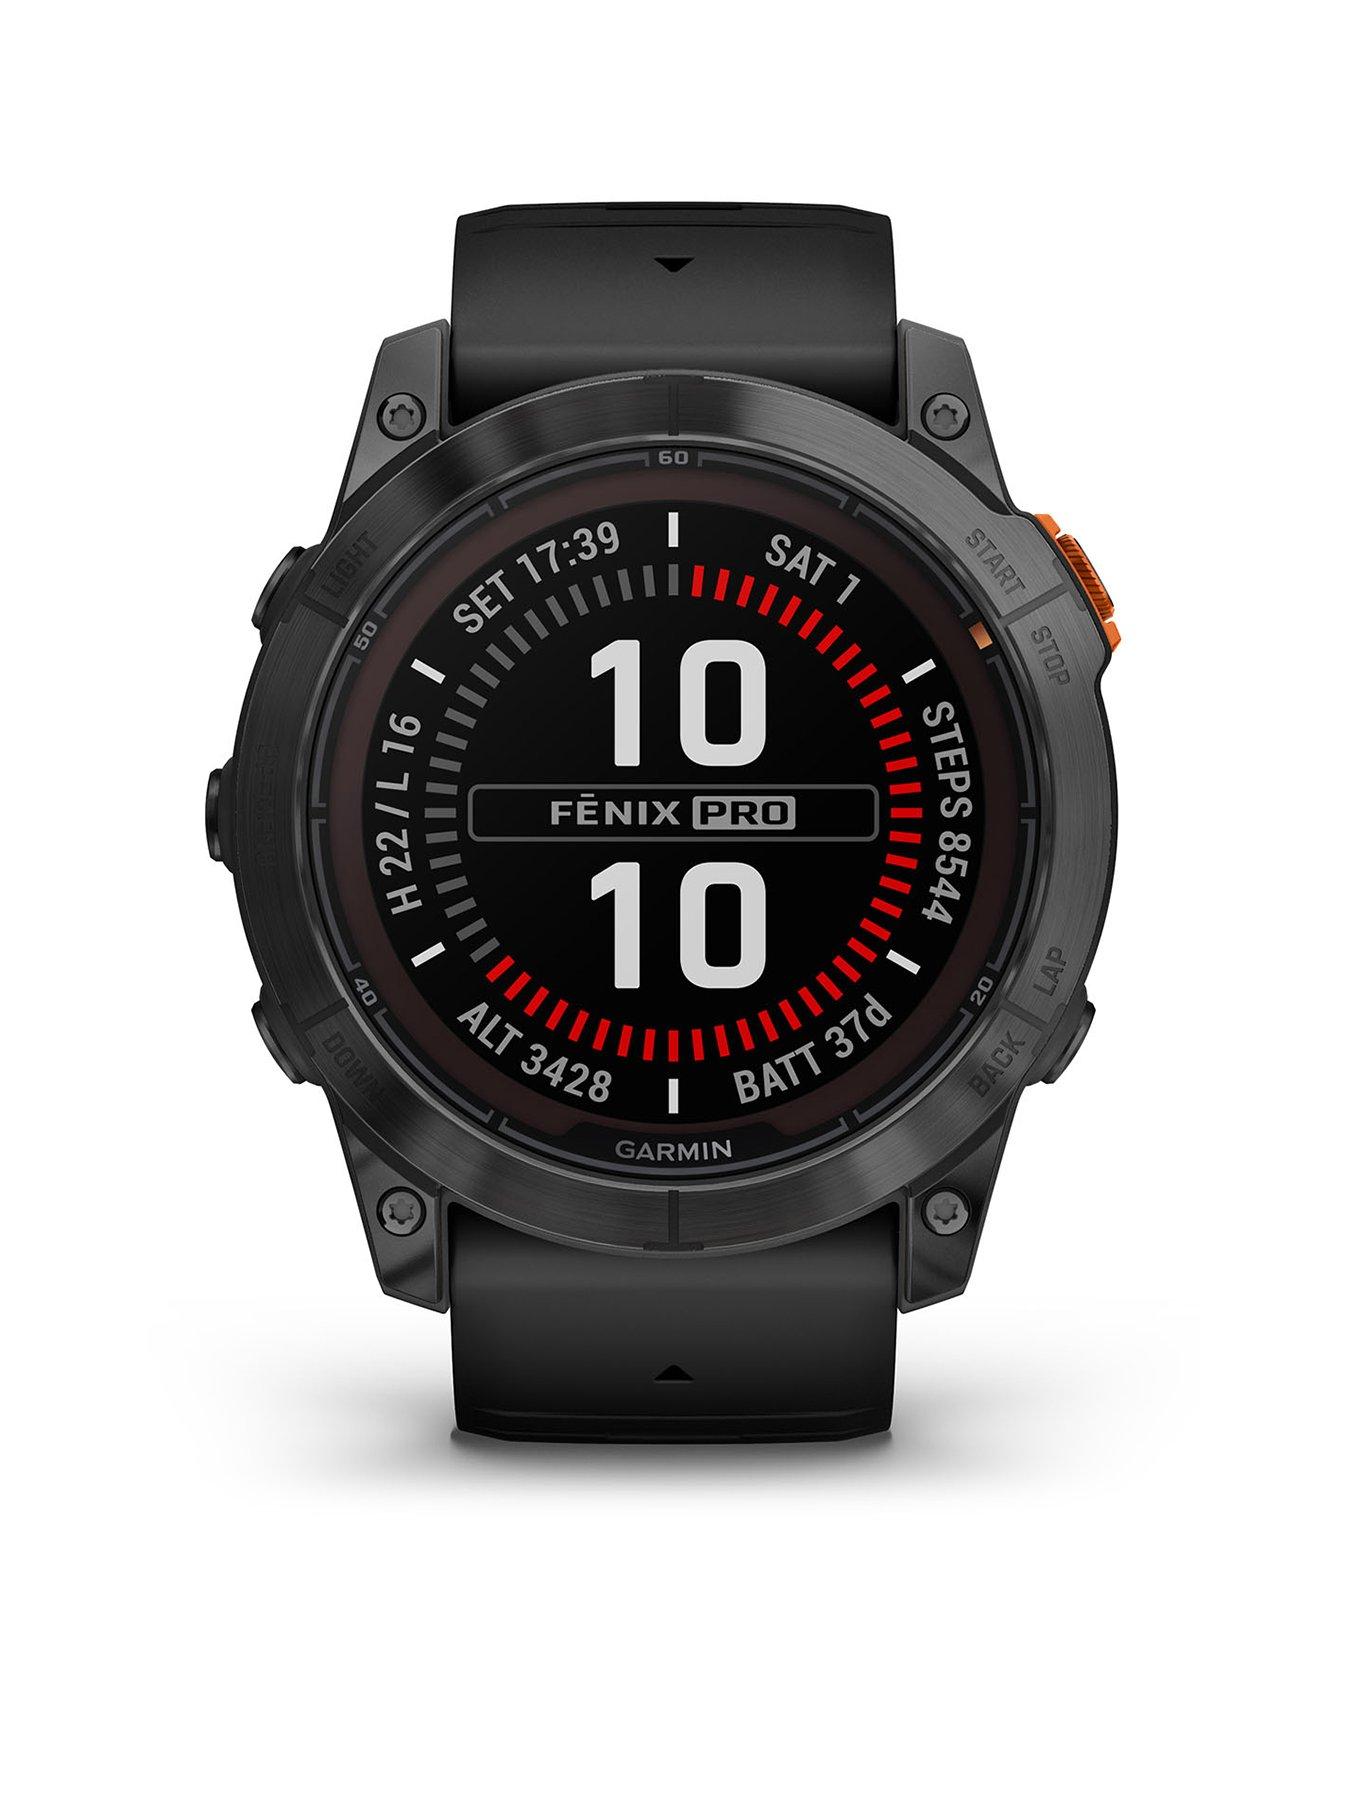 Garmin's Fenix 6 Pro is now 50% off, dropping to its lowest price ever